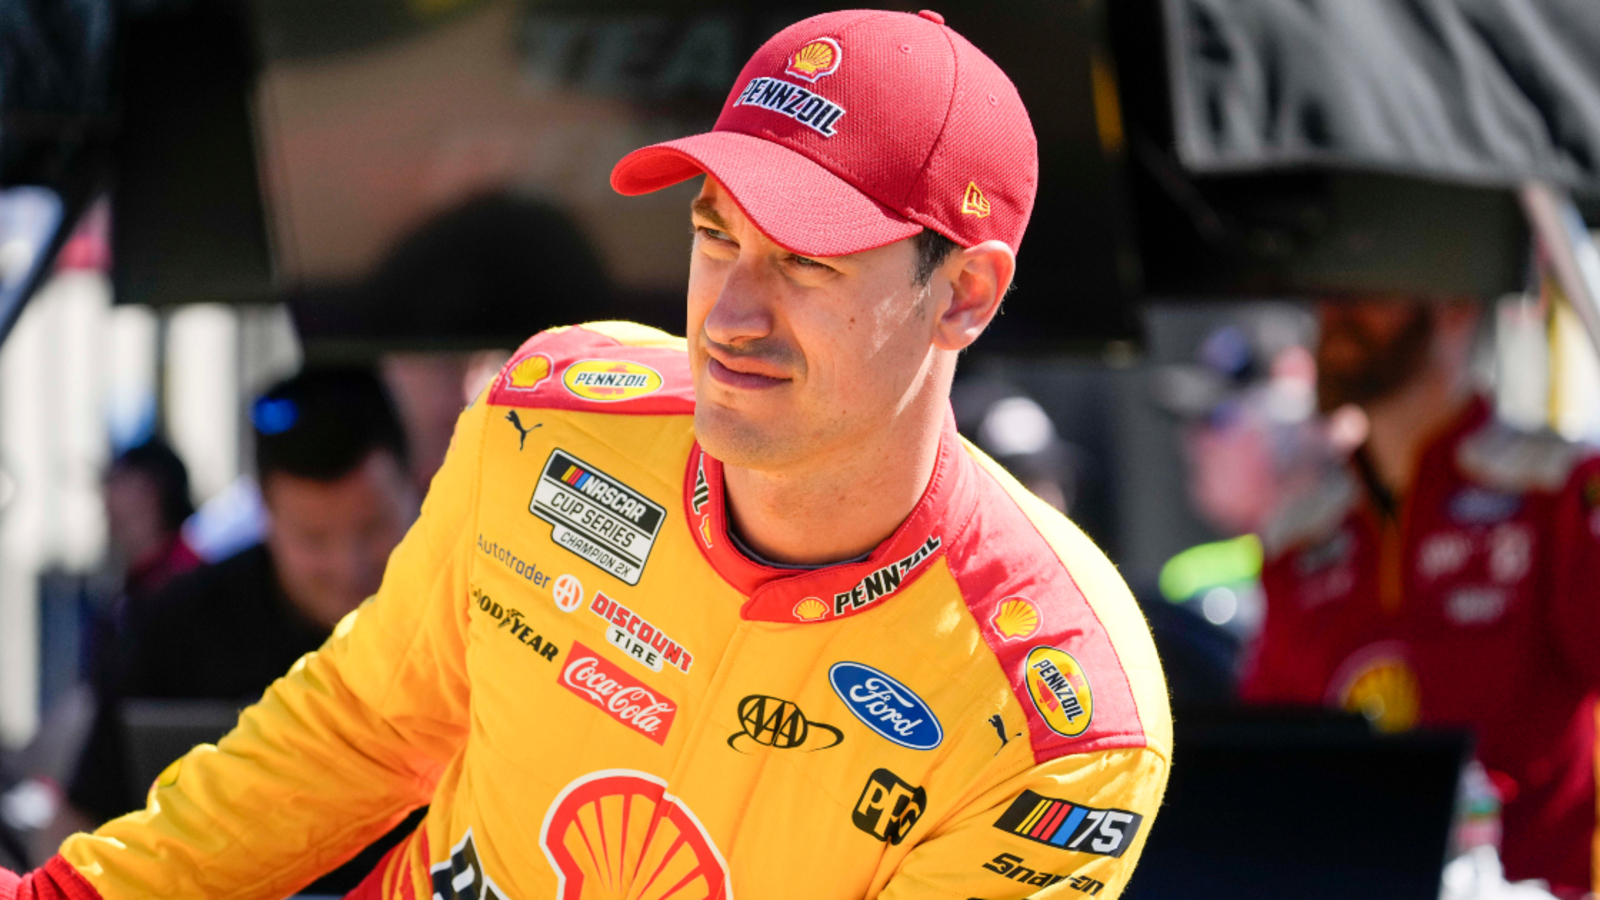 Joey Logano doesn't hold back on how he'll react if he's black-flagged for jumping restart next week